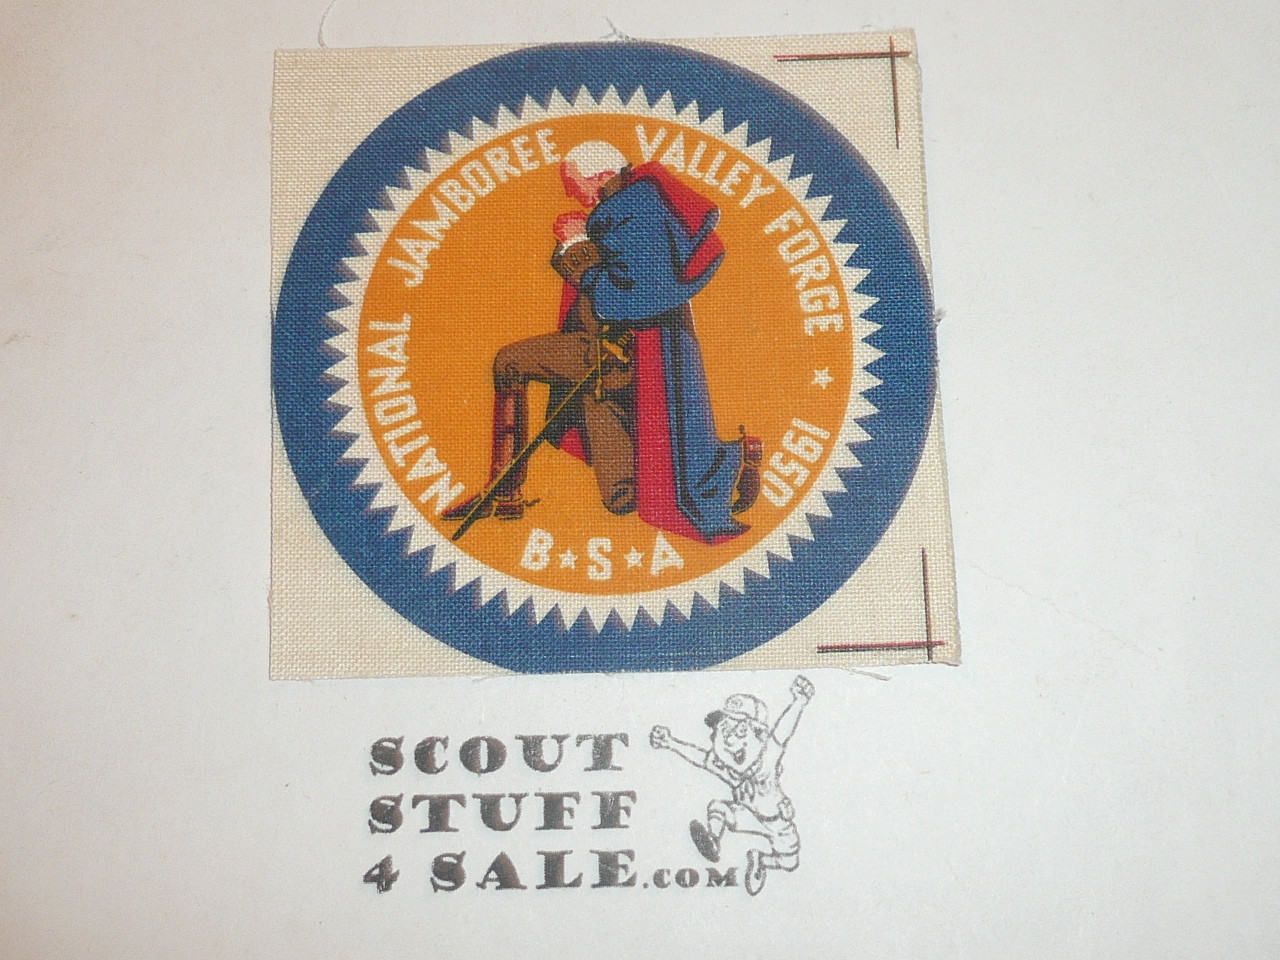 Copy of 1950 National Jamboree Canvas Patch, the canvas has not been cut to round